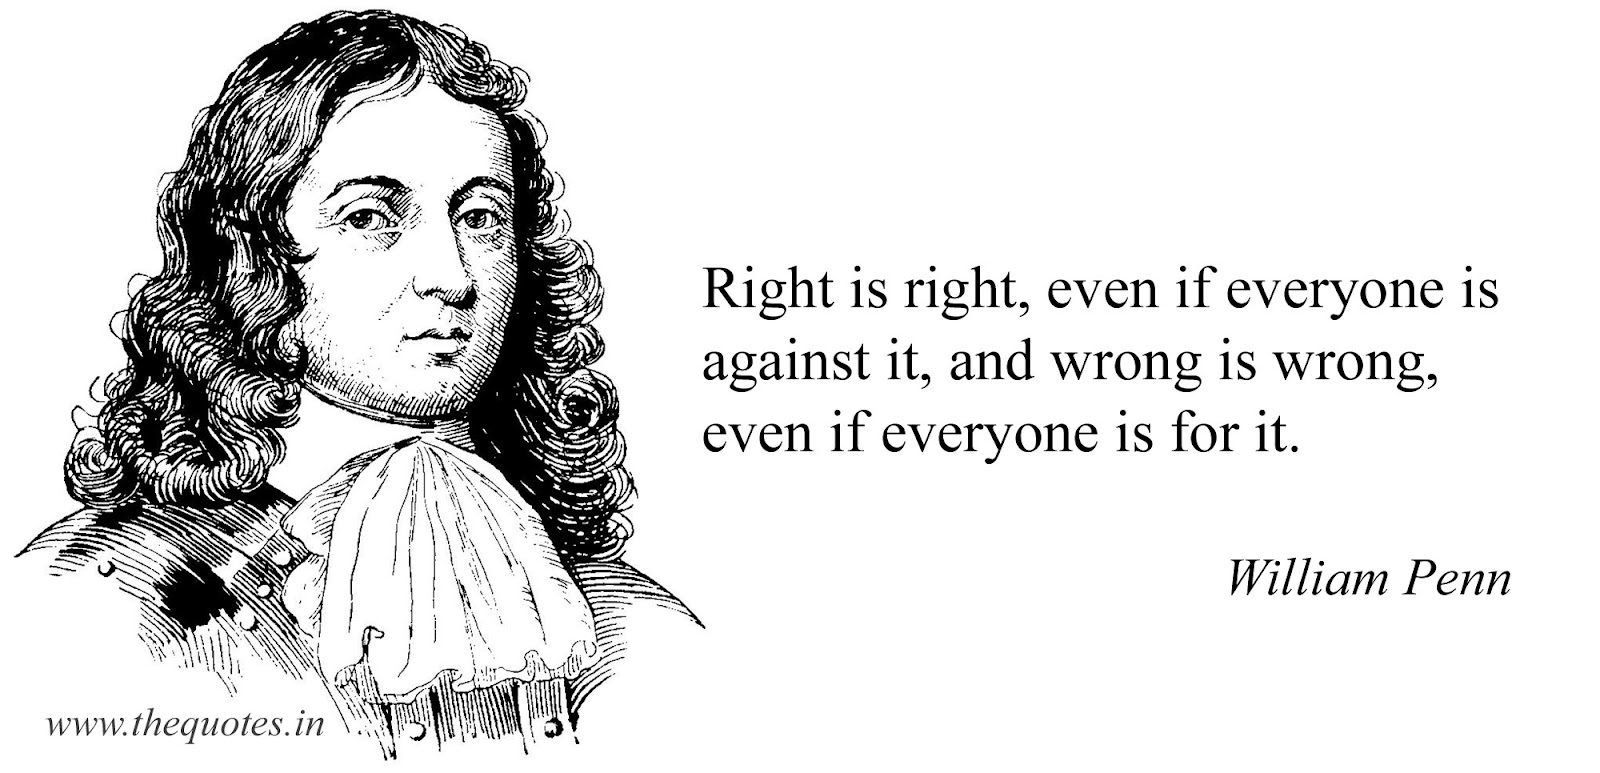 Image result for right is right even if everyone is against it